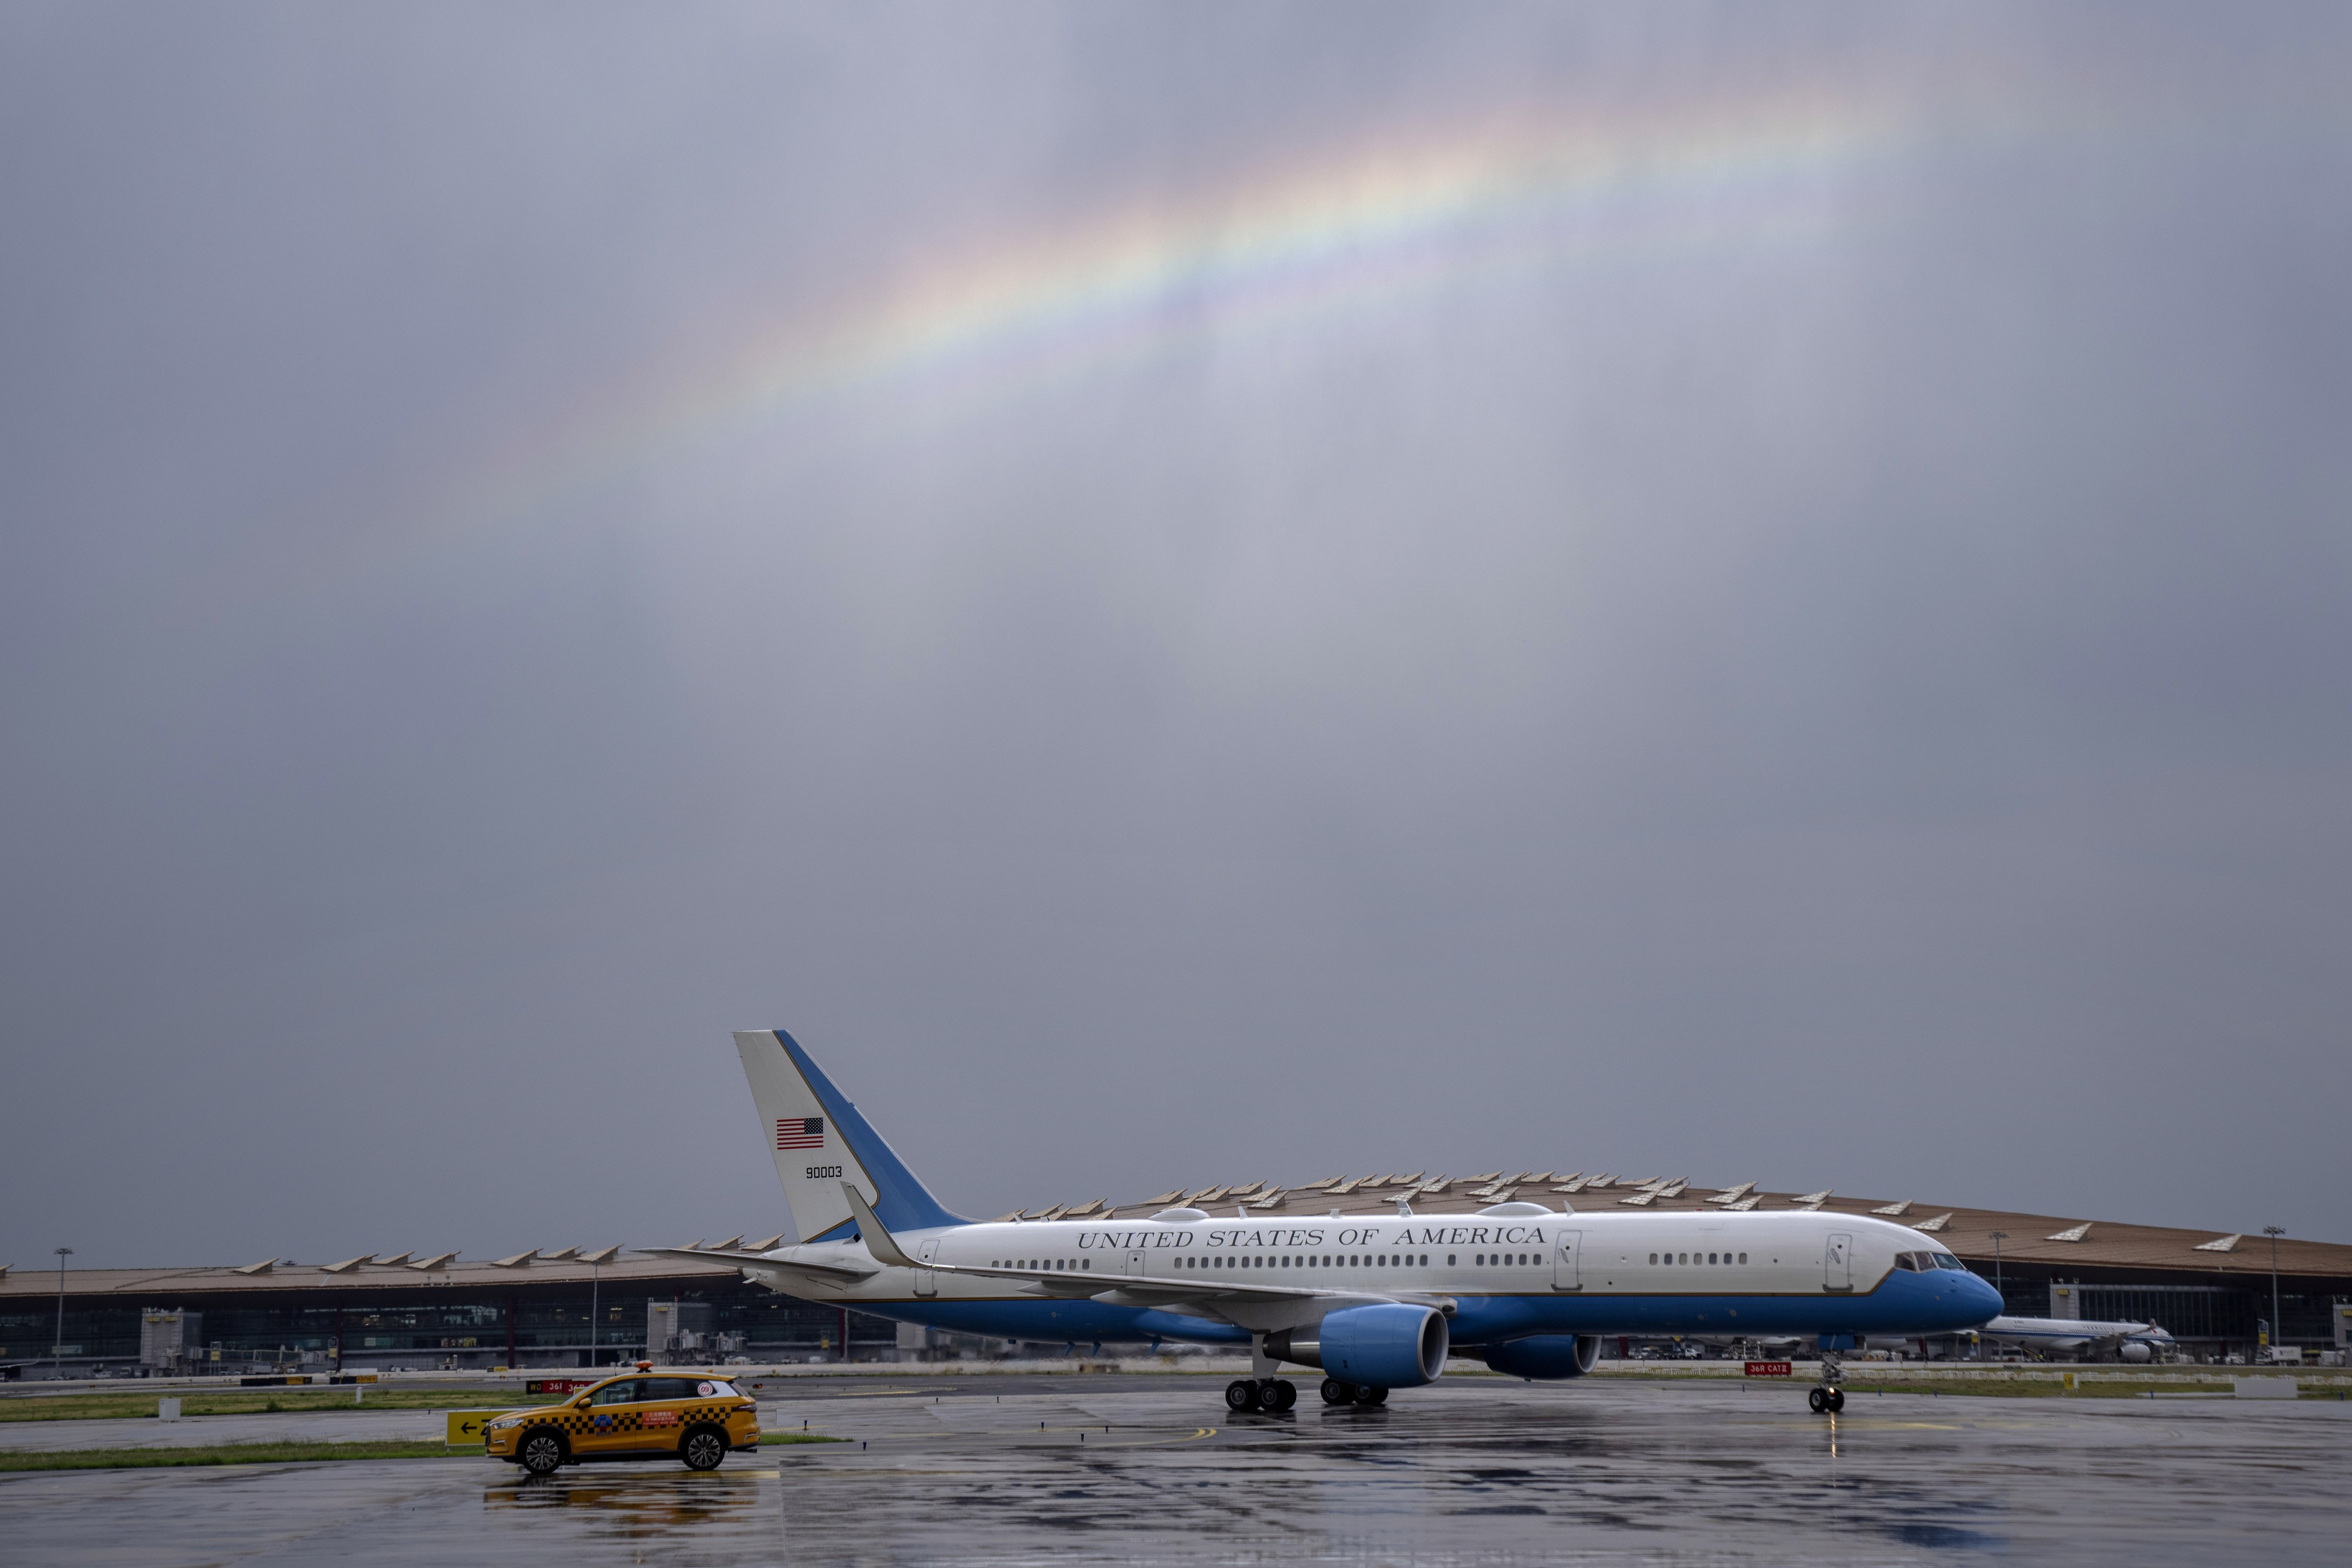 The plane carrying US Treasury Secretary Janet Yellen arrived in the Chinese capital on Thursday under a rainbow. Photo: EPA-EFE